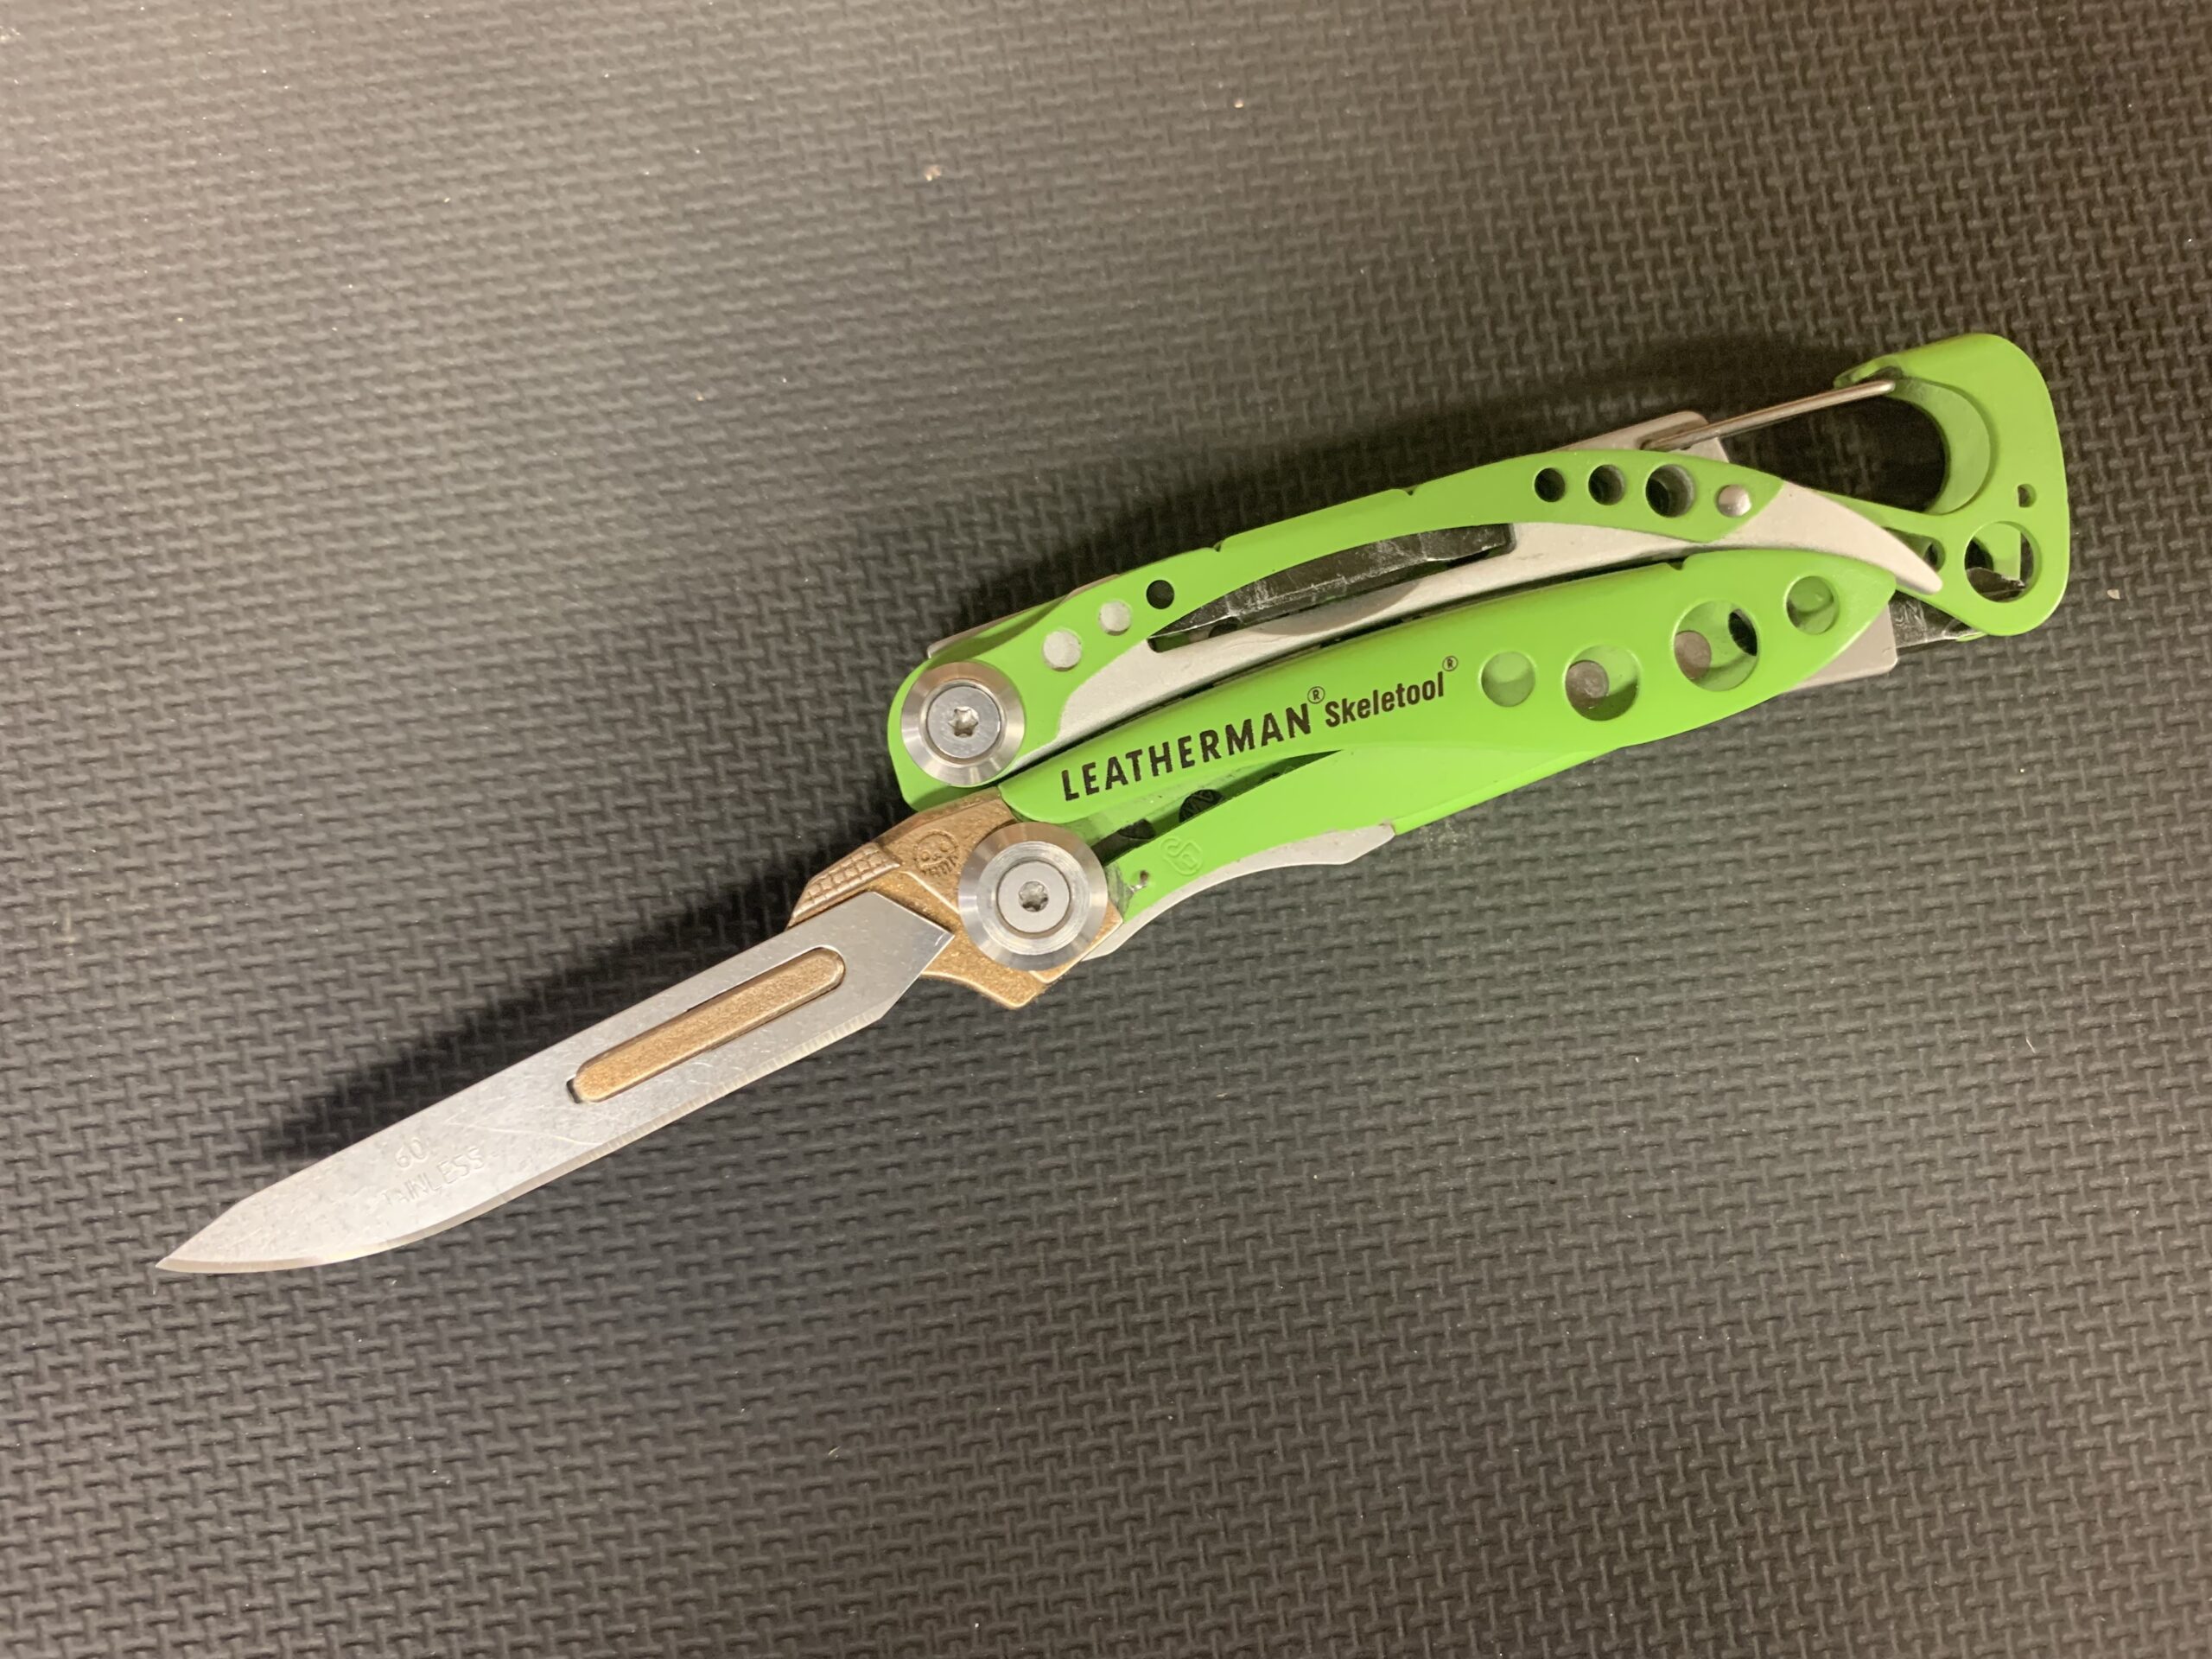 The Skelpel lets you use scalpel blades on your Skeletool